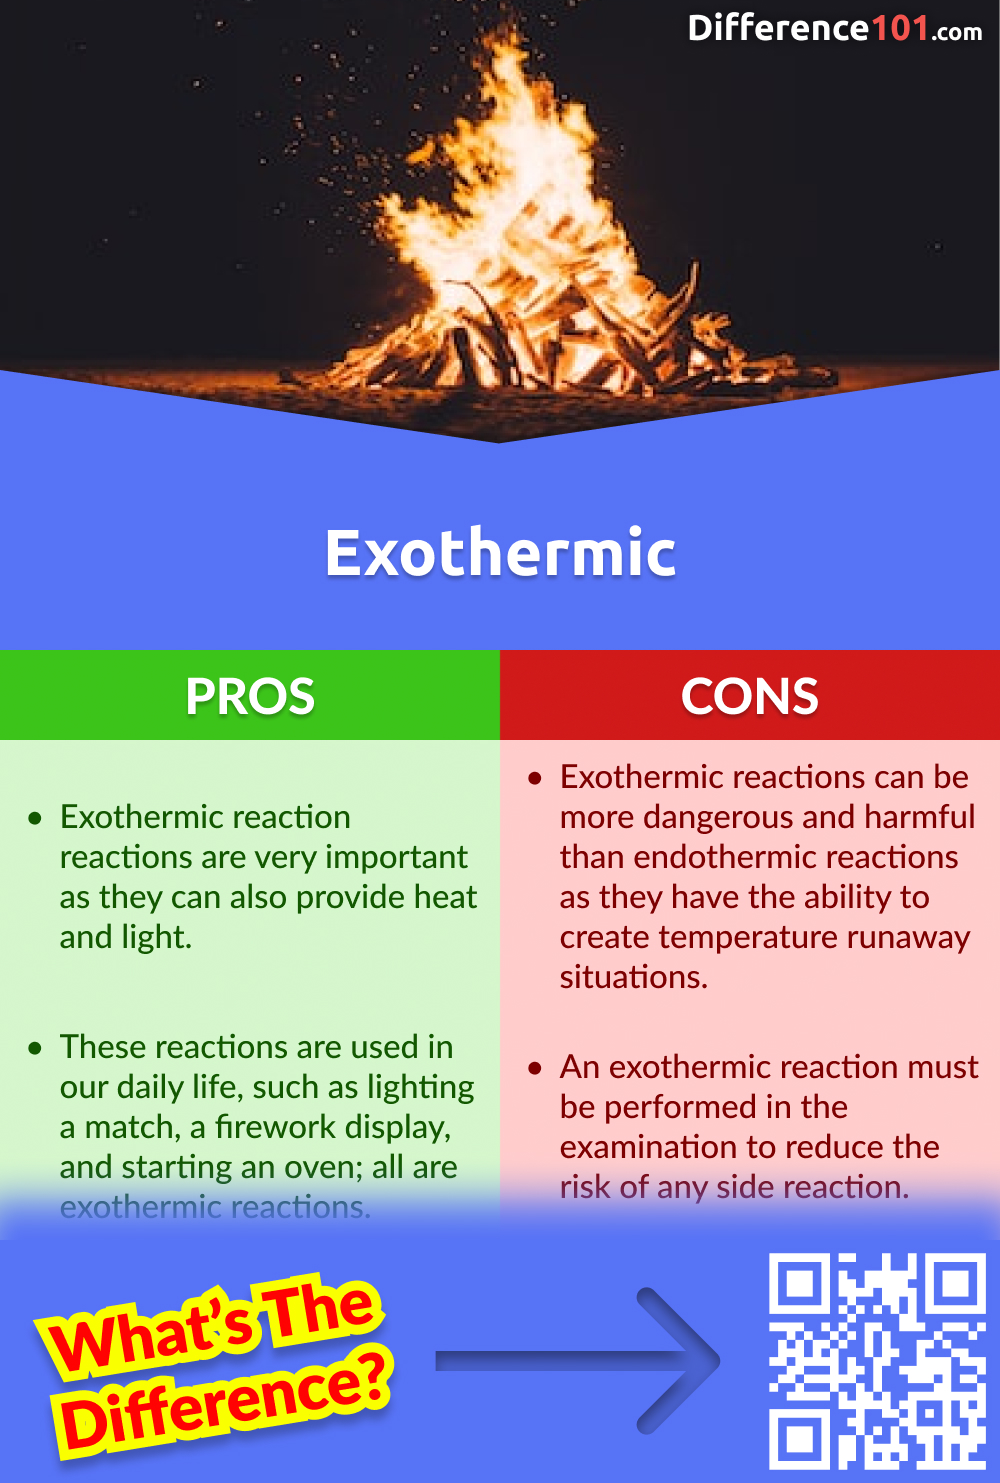 Exothermic Reaction Pros and Cons